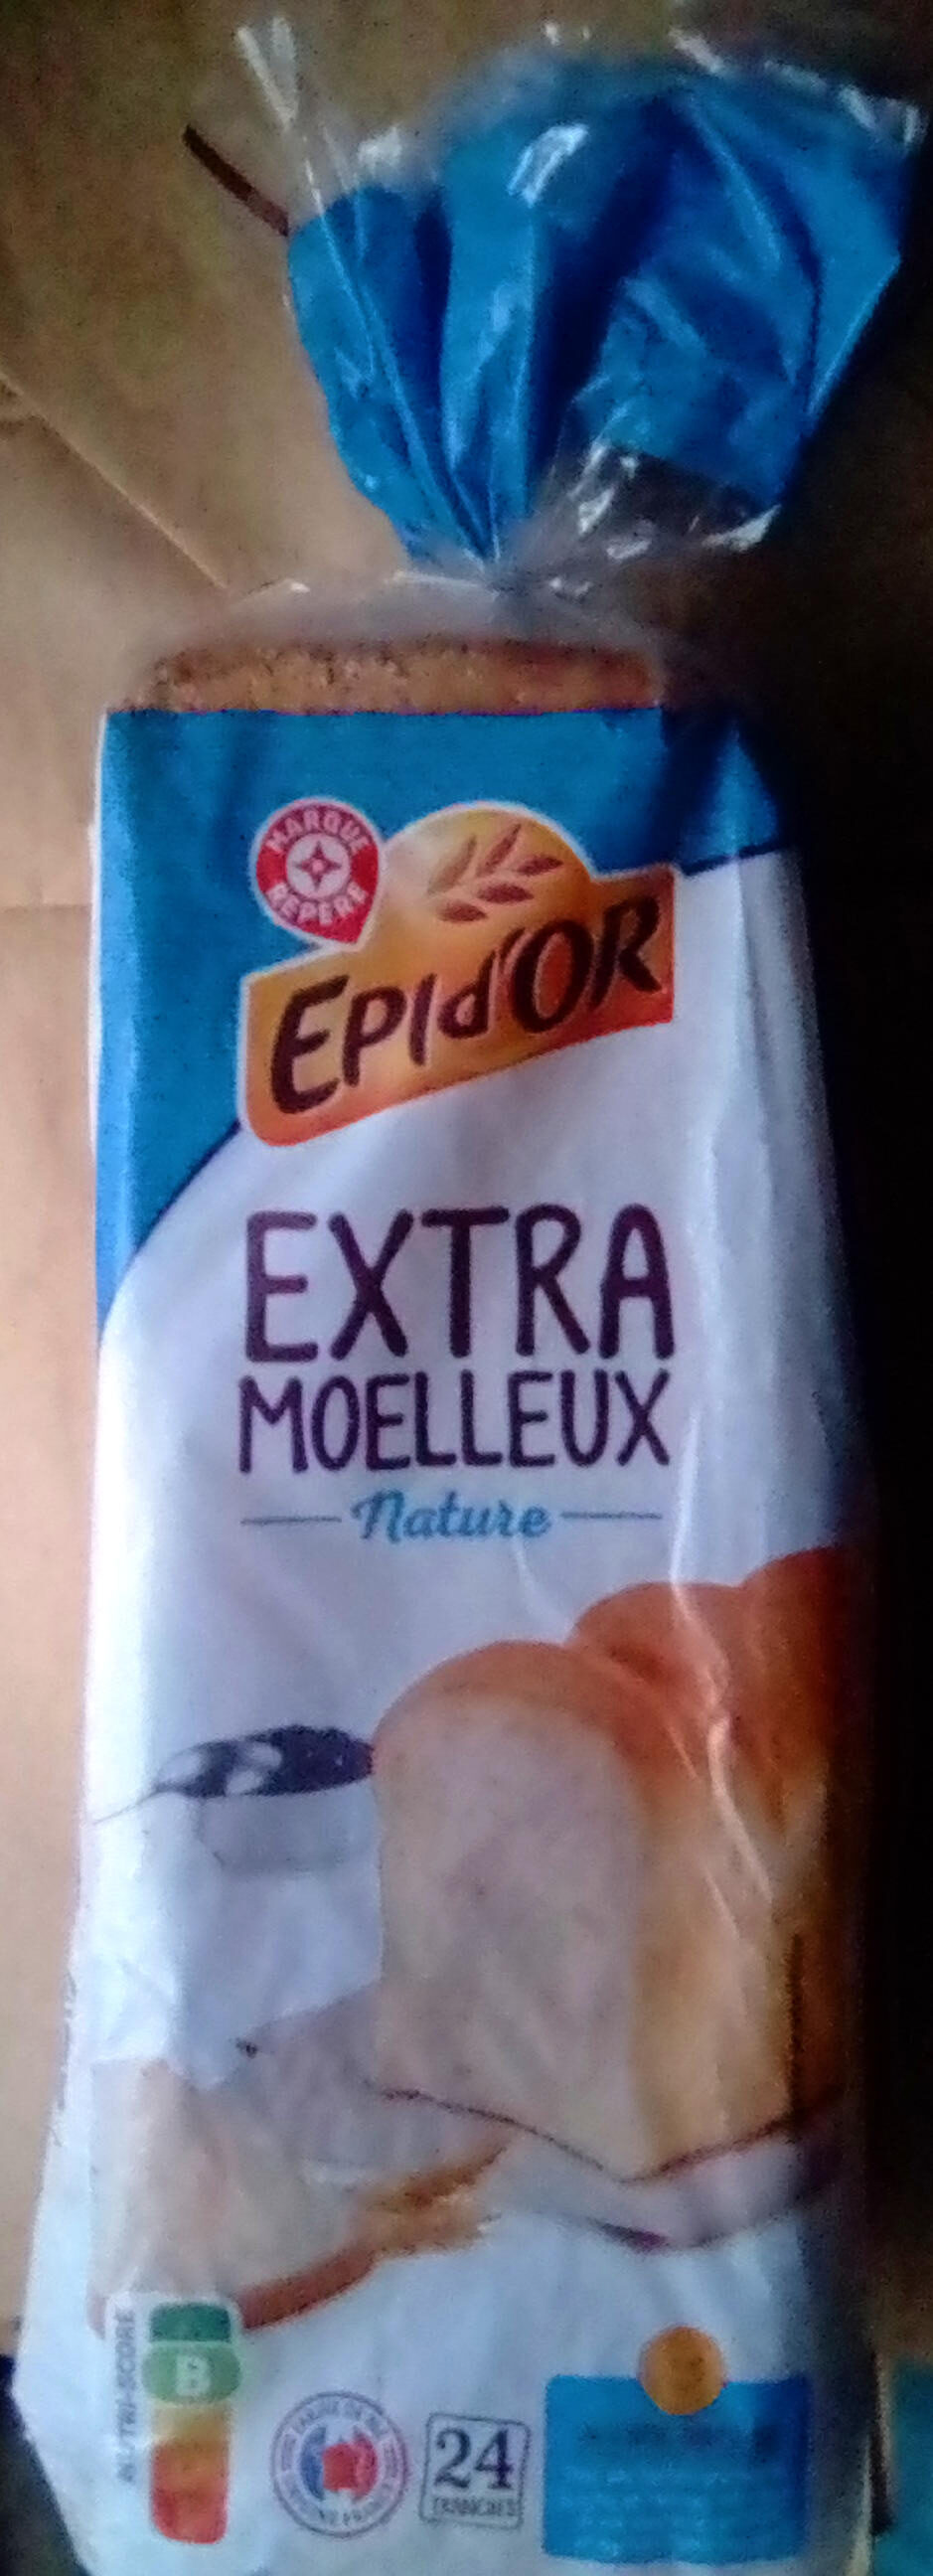 Extra Moelleux - Nature - نتاج - fr